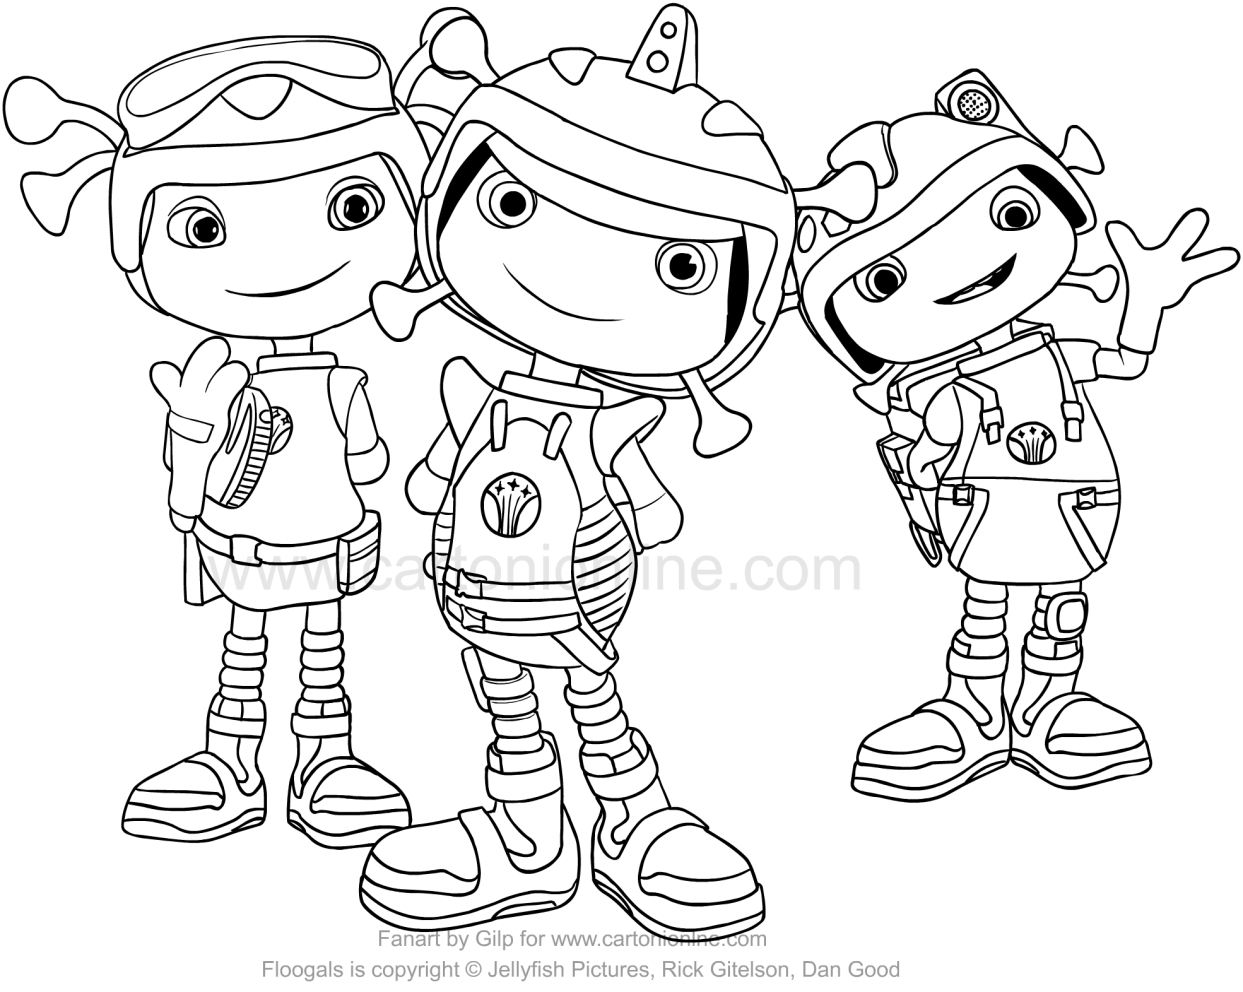 Drawing the Floogals coloring pages printable for kids